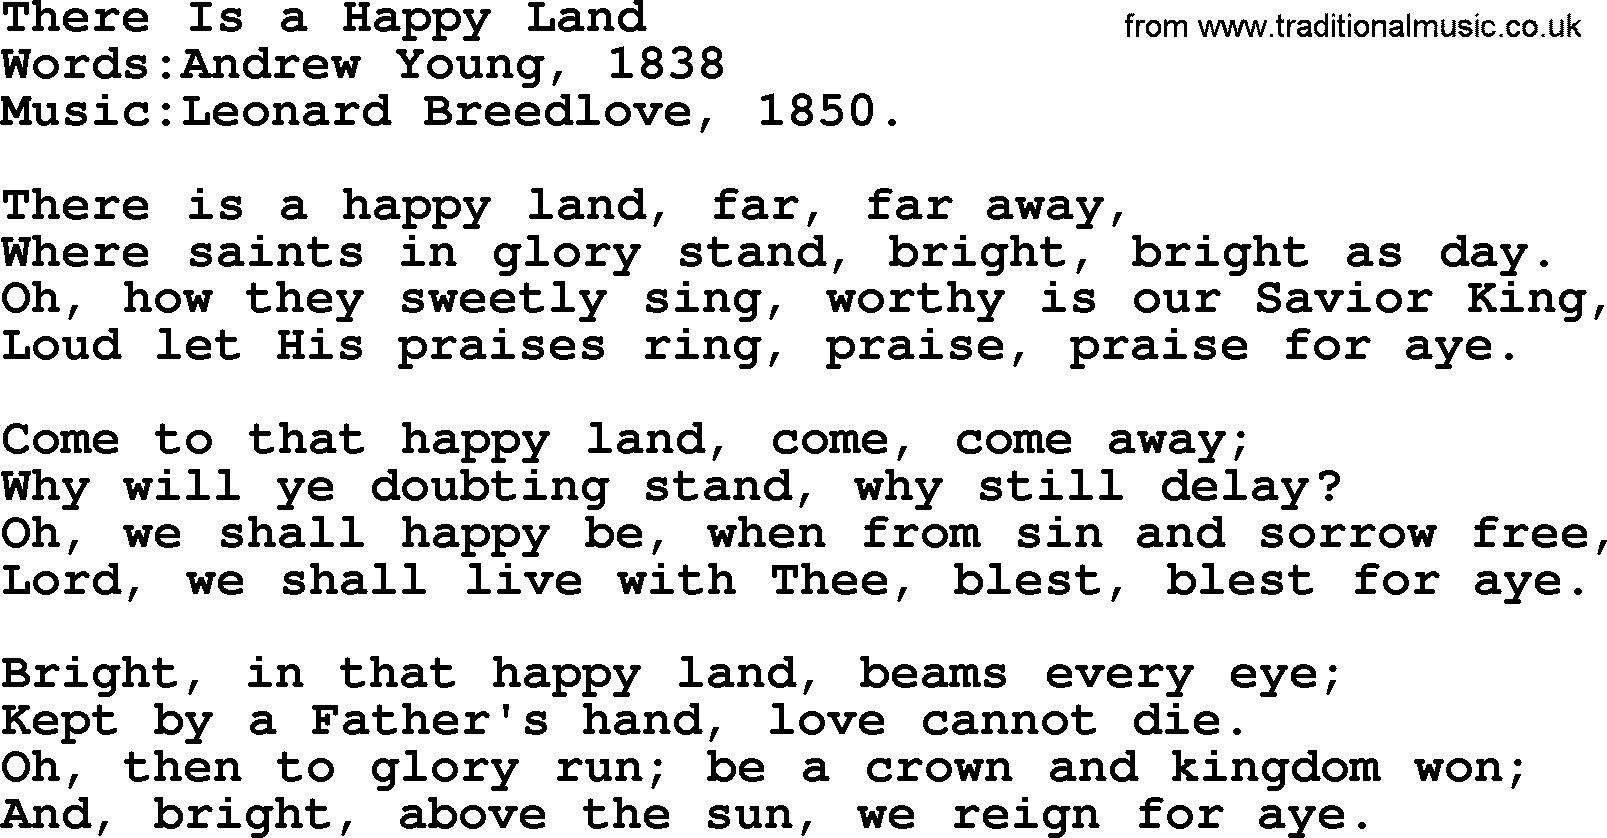 Songs and Hymns about Heaven: There Is A Happy Land lyrics with PDF